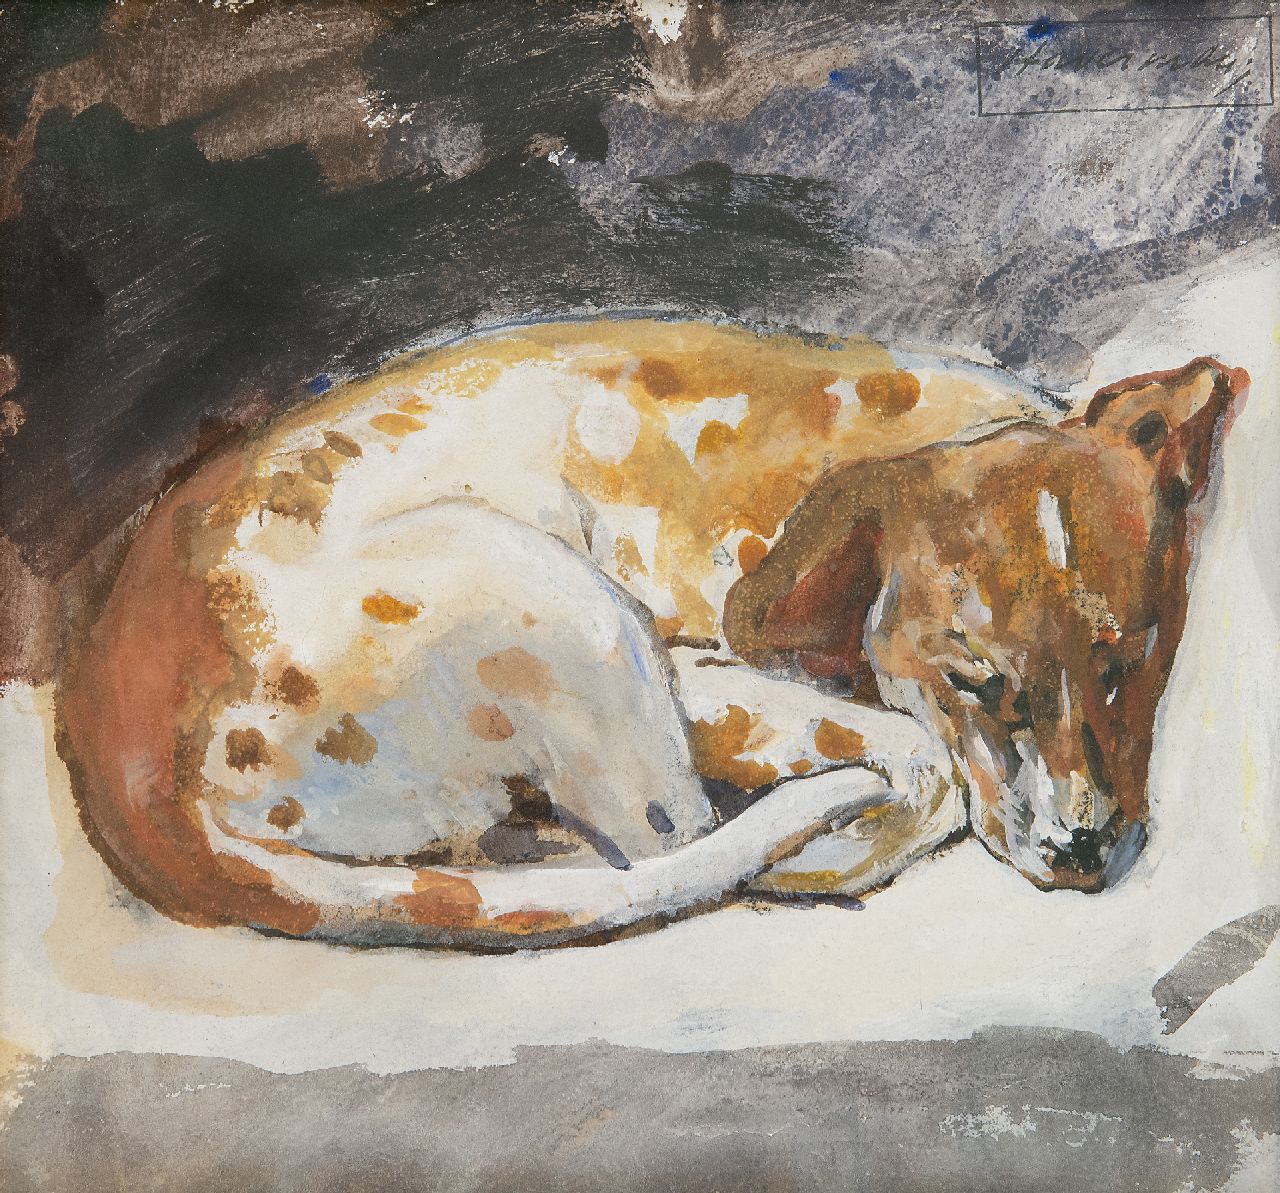 Haverman H.J.  | Hendrik Johannes Haverman | Watercolours and drawings offered for sale | Sleeping dog, watercolour and gouache on paper 16.4 x 18.0 cm, signed u.r. with studio stamp